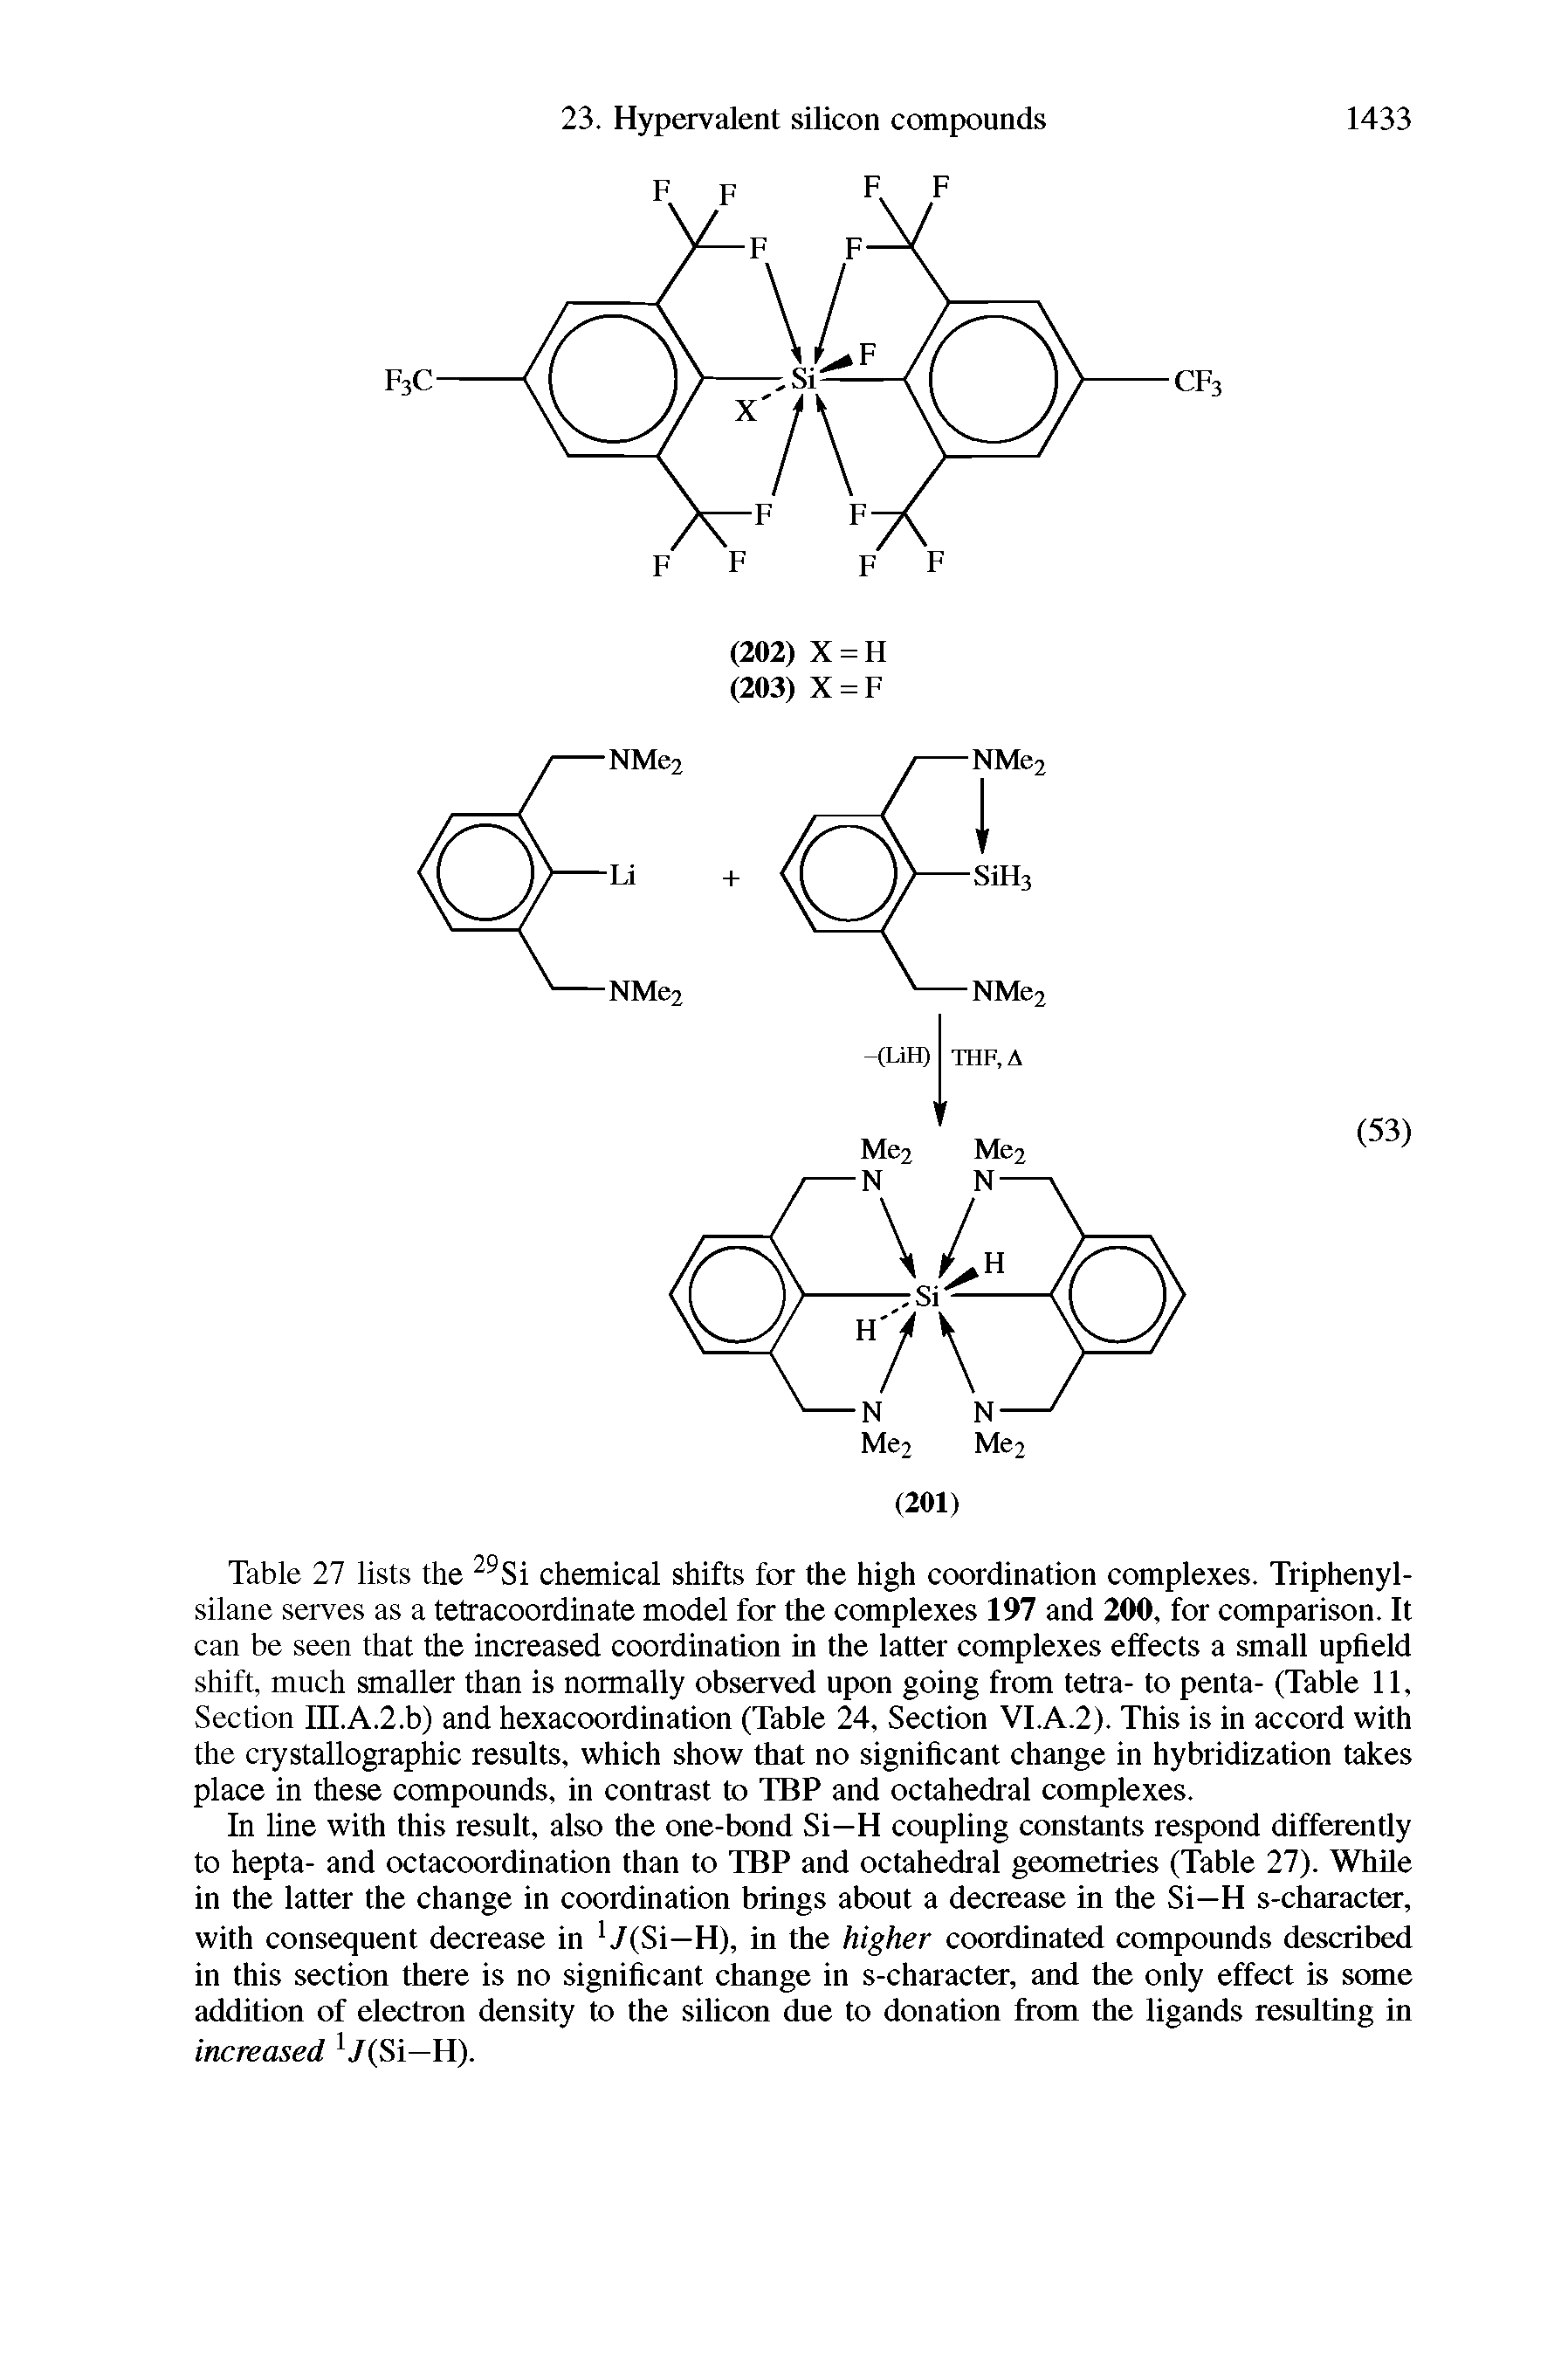 Table 27 lists the 29Si chemical shifts for the high coordination complexes. Triphenyl-silane serves as a tetracoordinate model for the complexes 197 and 200, for comparison. It can be seen that the increased coordination in the latter complexes effects a small upheld shift, much smaller than is normally observed upon going from tetra- to penta- (Table 11, Section III.A.2.b) and hexacoordination (Table 24, Section VI.A.2). This is in accord with the crystallographic results, which show that no significant change in hybridization takes place in these compounds, in contrast to TBP and octahedral complexes.